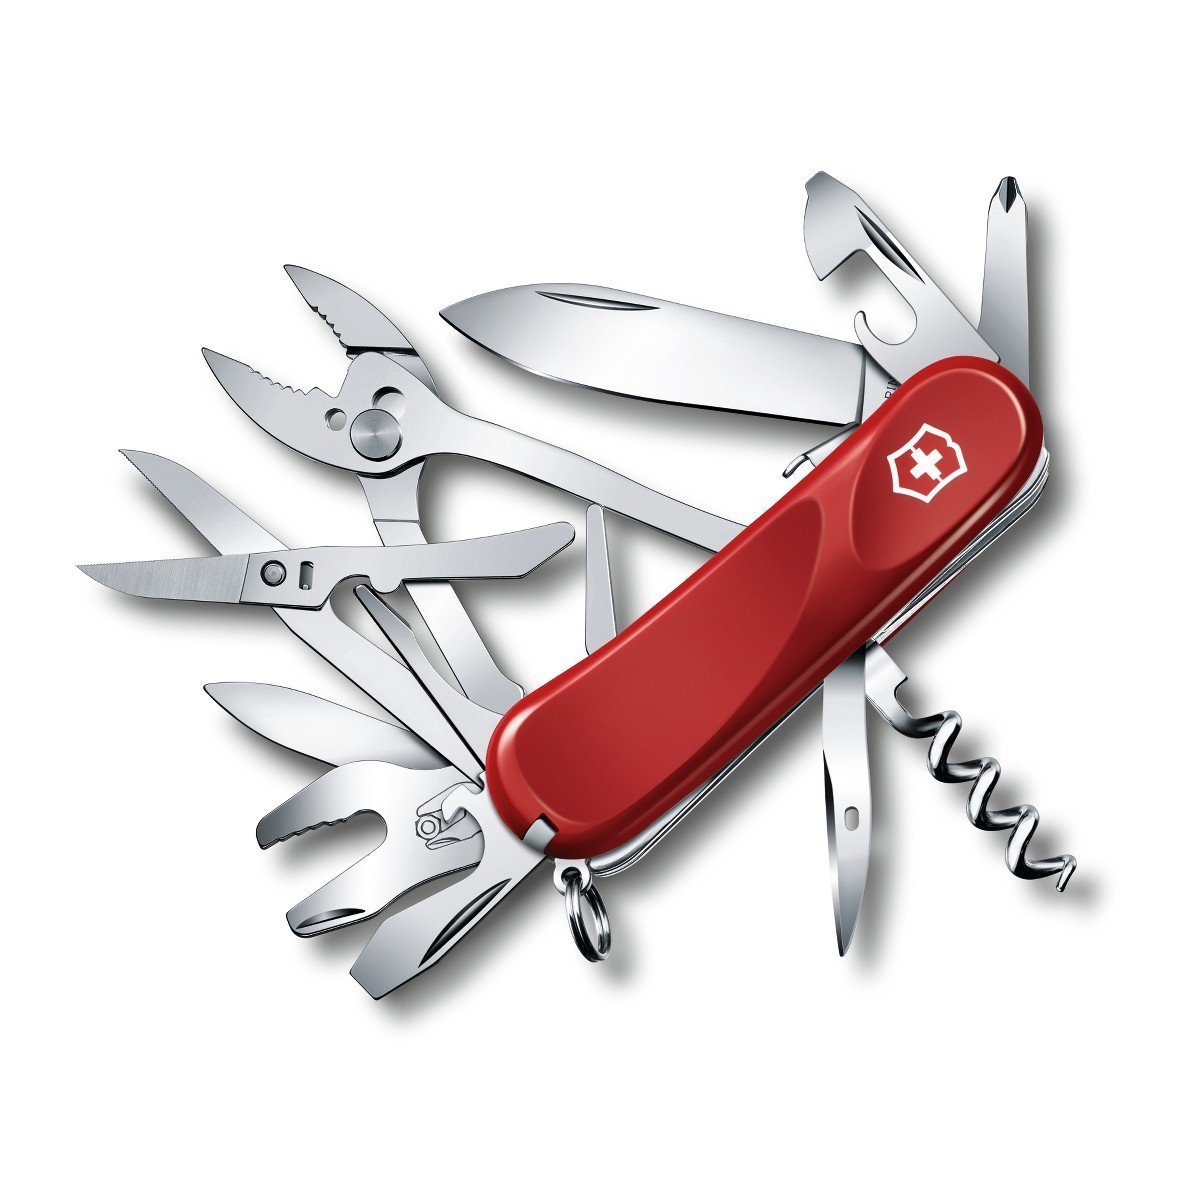 The Swiss Army Knife is an essential Father's Day gift, that every man should have. <br/><br/> You can pick this up at  <a href="https://amzn.to/2IB6wfC">Amazon for about $47.76</a>.